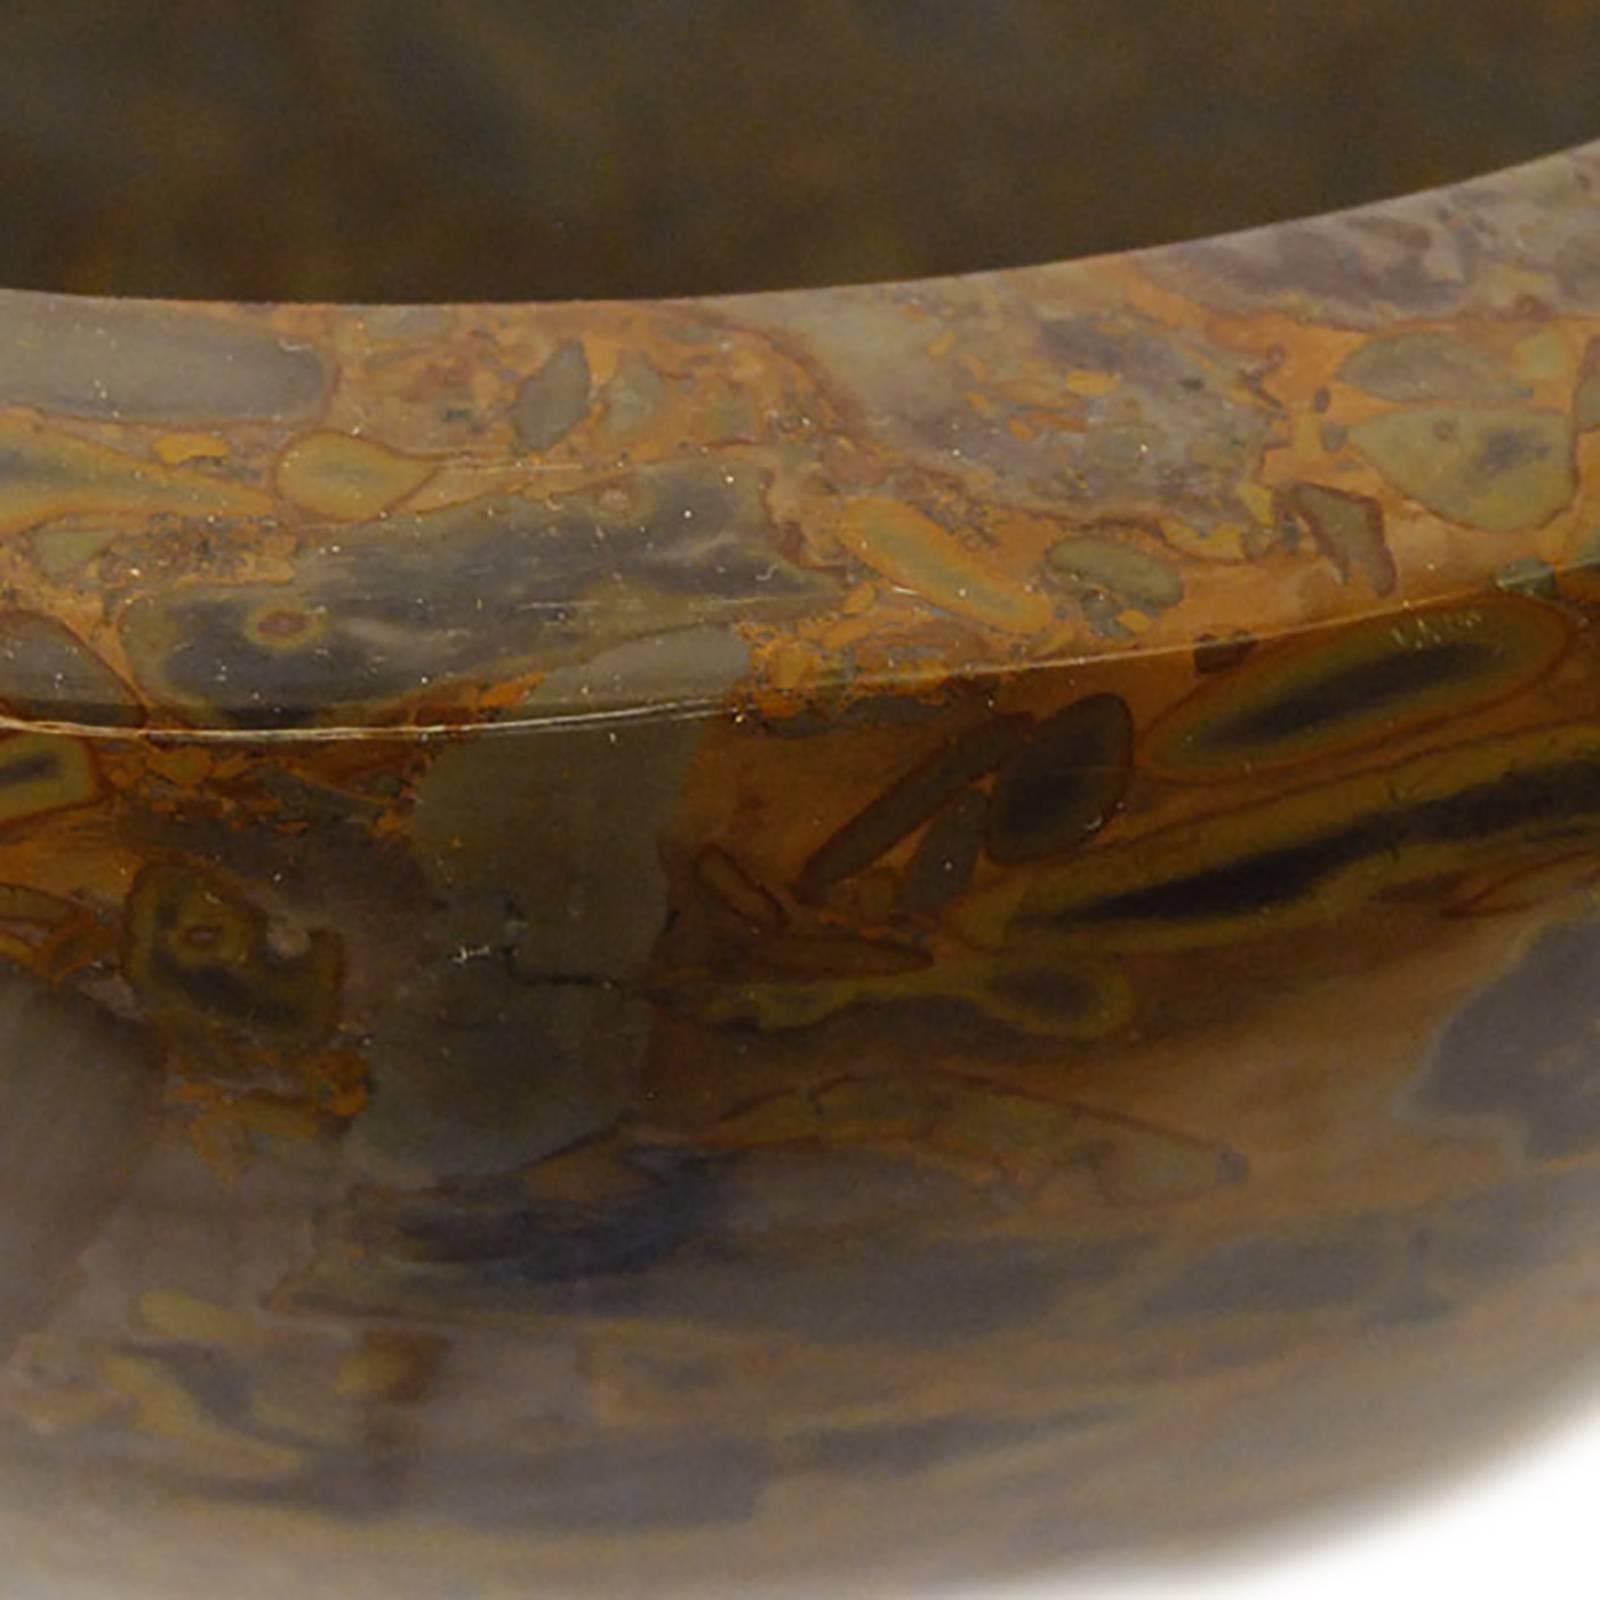 This highly polished stone basin is a rich blend of texture and color. It was carved by hand from a single chunk of pudding stone native to the Jiangsu region of China. Chinese scholars have appreciated pudding stone for centuries, it's natural